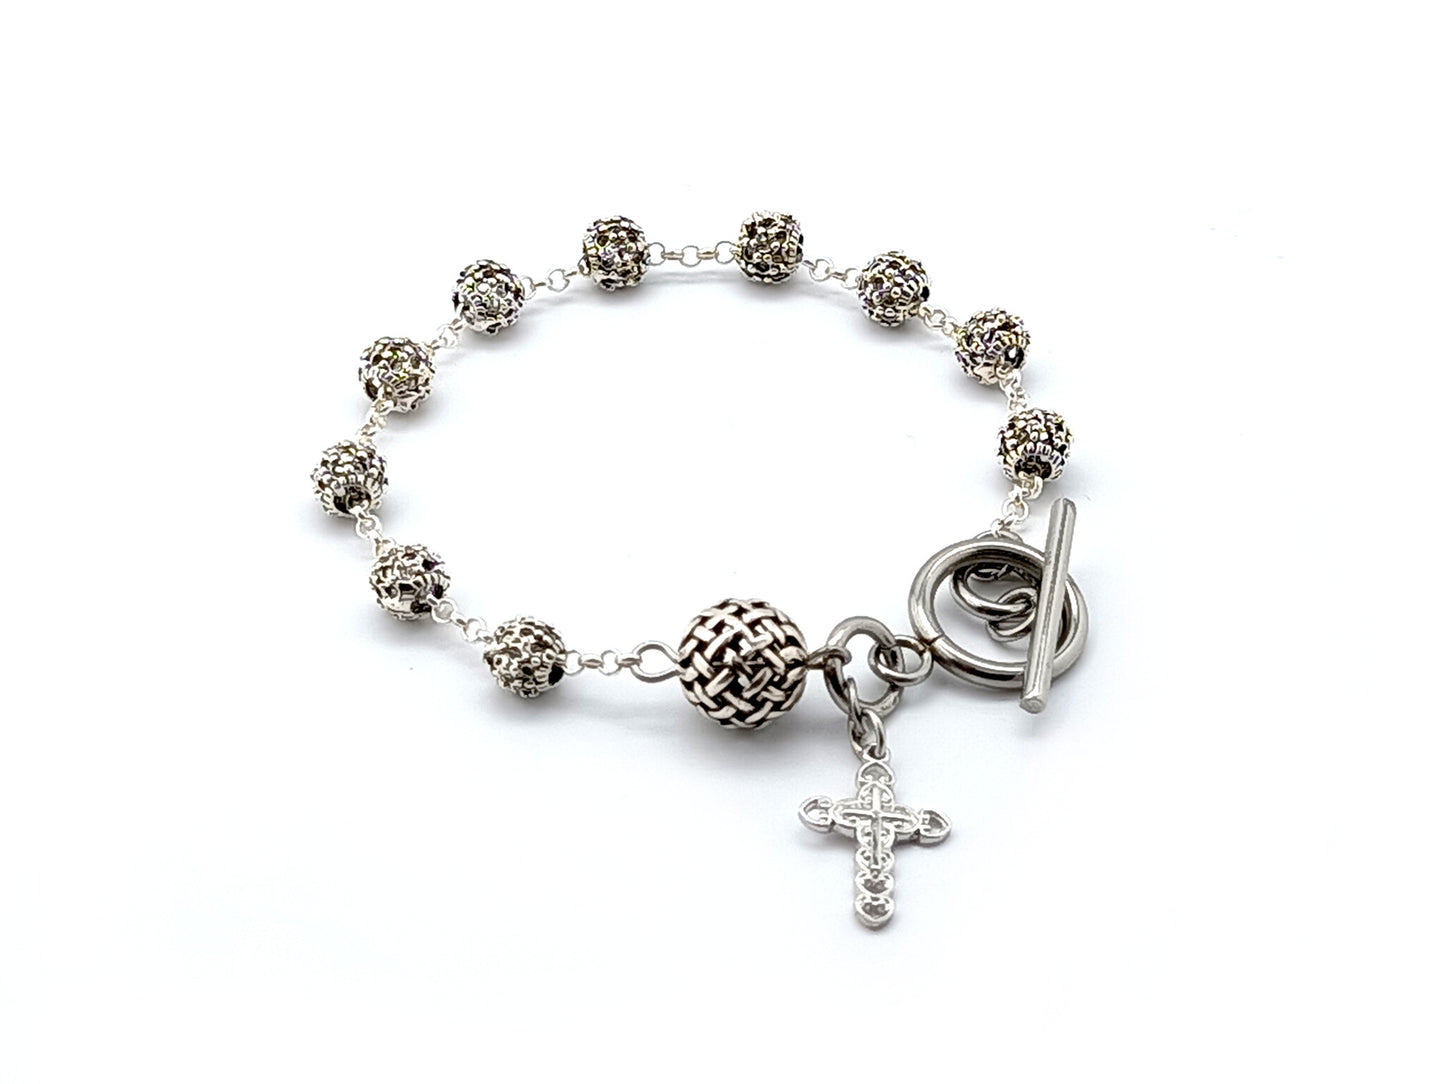 Sterling silver unique rosary beads single decade rosary bracelet with 925 sterling silver lattice beads, chain and cross.